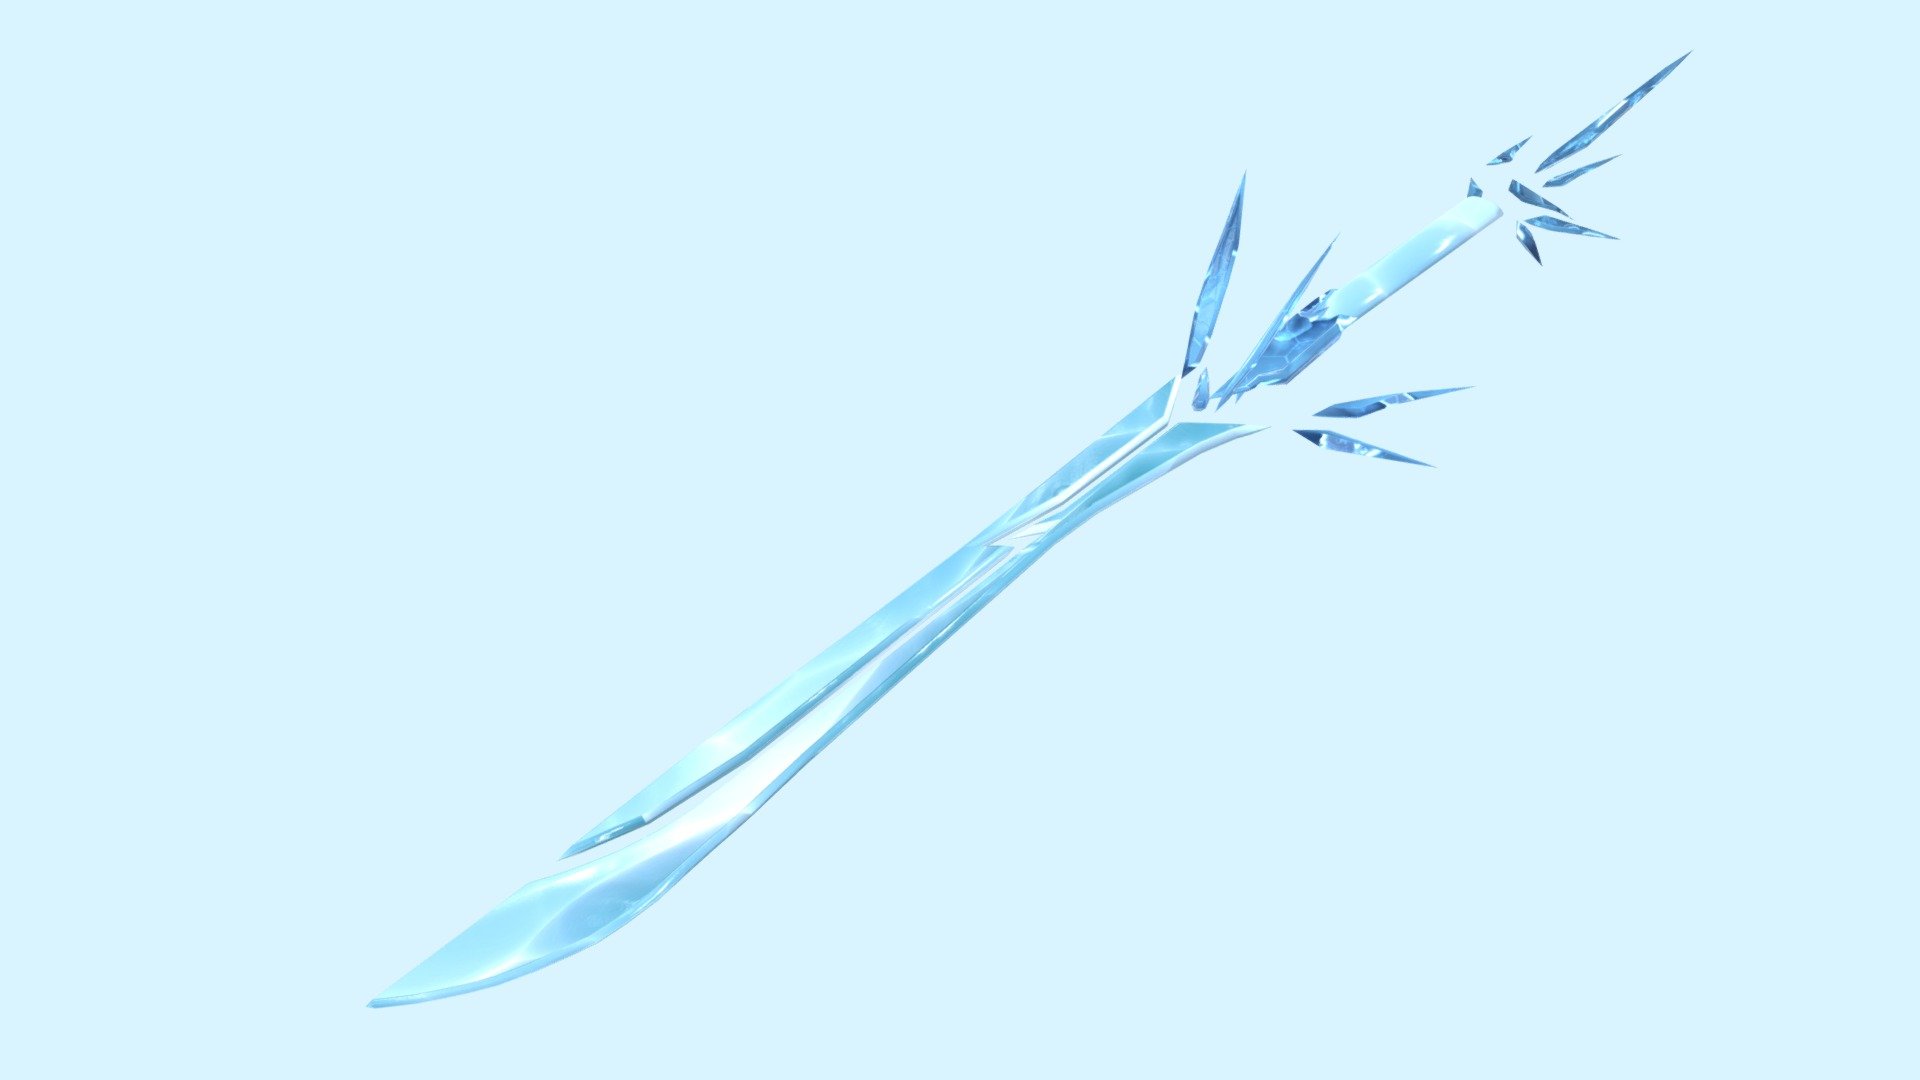 Final step of a sword that i reproduced from a pinterest picture. Now that i learned Substance i could finally do the right textures.
Final Render on my Artstation: https://www.artstation.com/artwork/KryrJ4 - Ice Sword - Download Free 3D model by andrea.chierchia 3d model